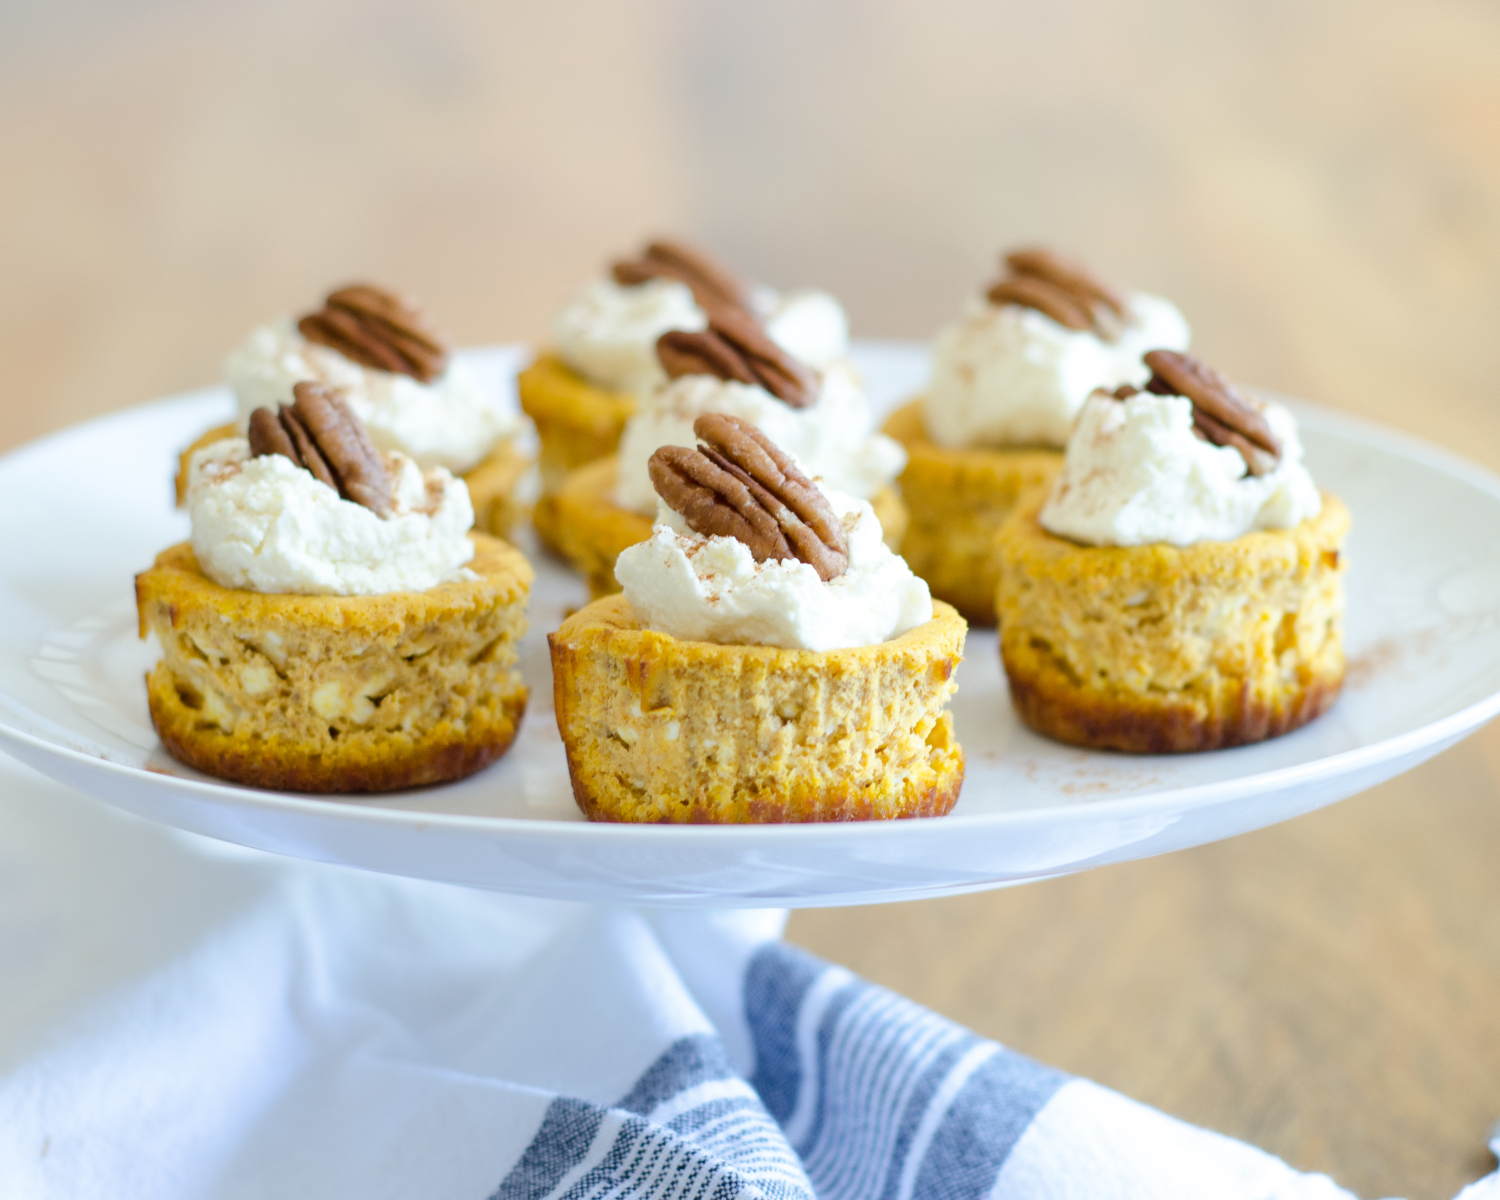 Gluten free and keto mini pumpkin cheesecakes are a perfect fall treat. All the pumpkin spice flavors you love and only 1.8 g of net carbs!